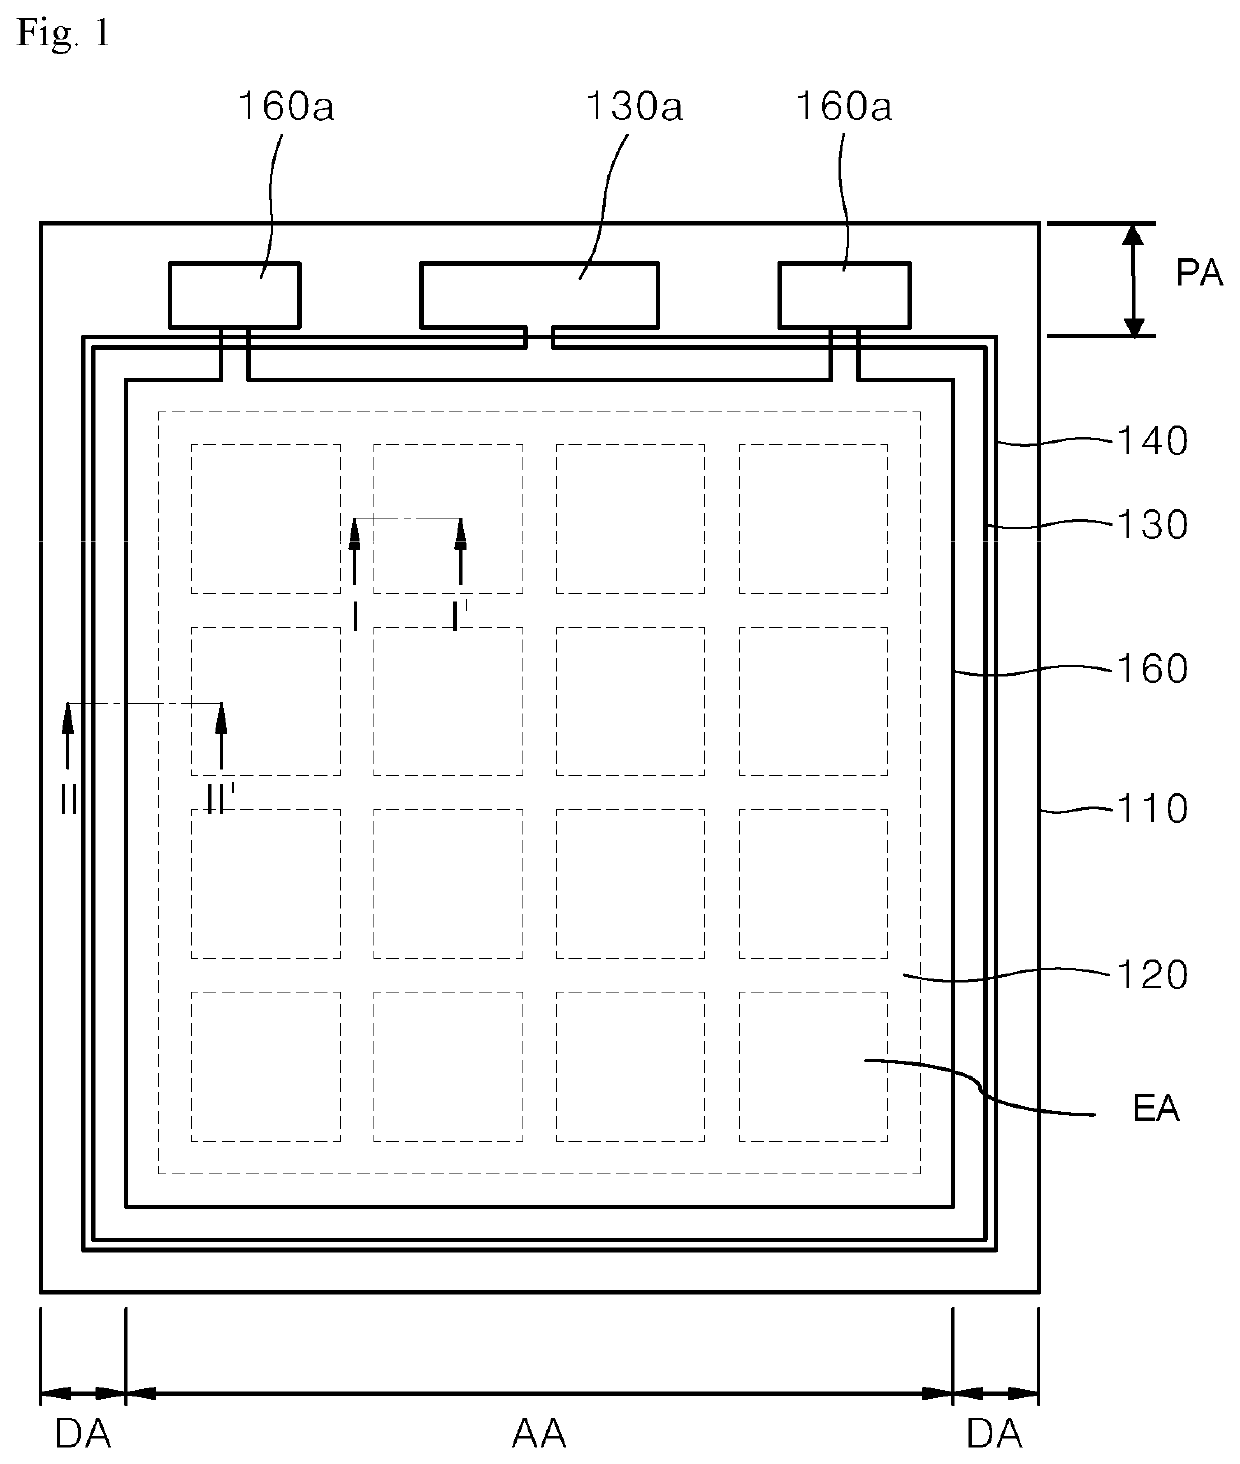 OLED panel for lighting device with moisture intrusion delay effect